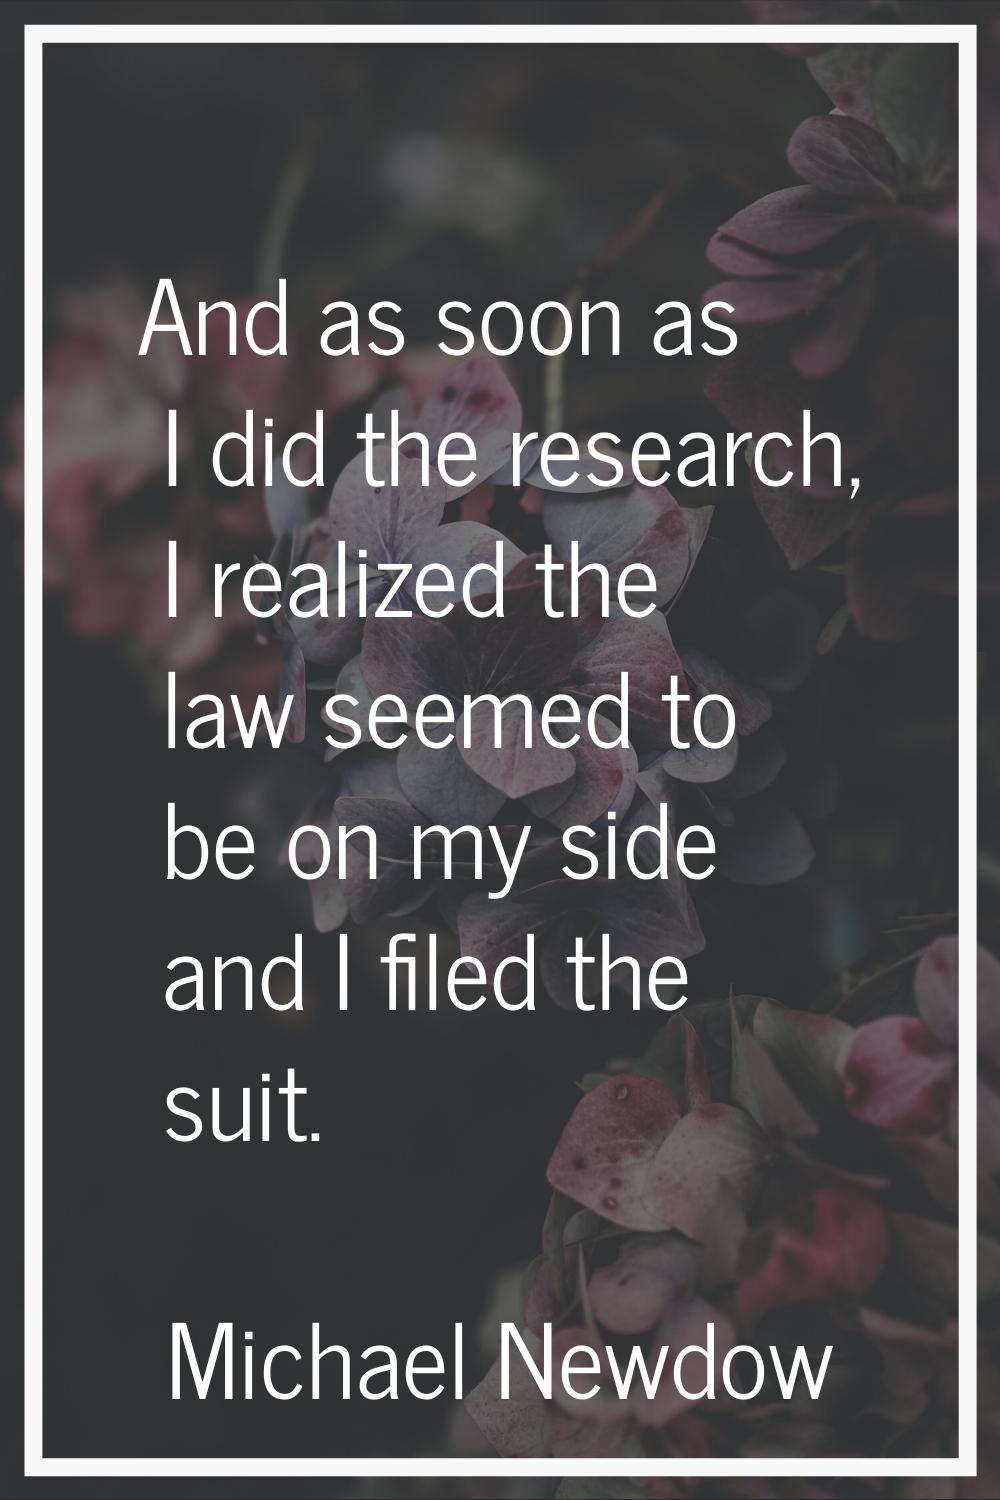 And as soon as I did the research, I realized the law seemed to be on my side and I filed the suit.